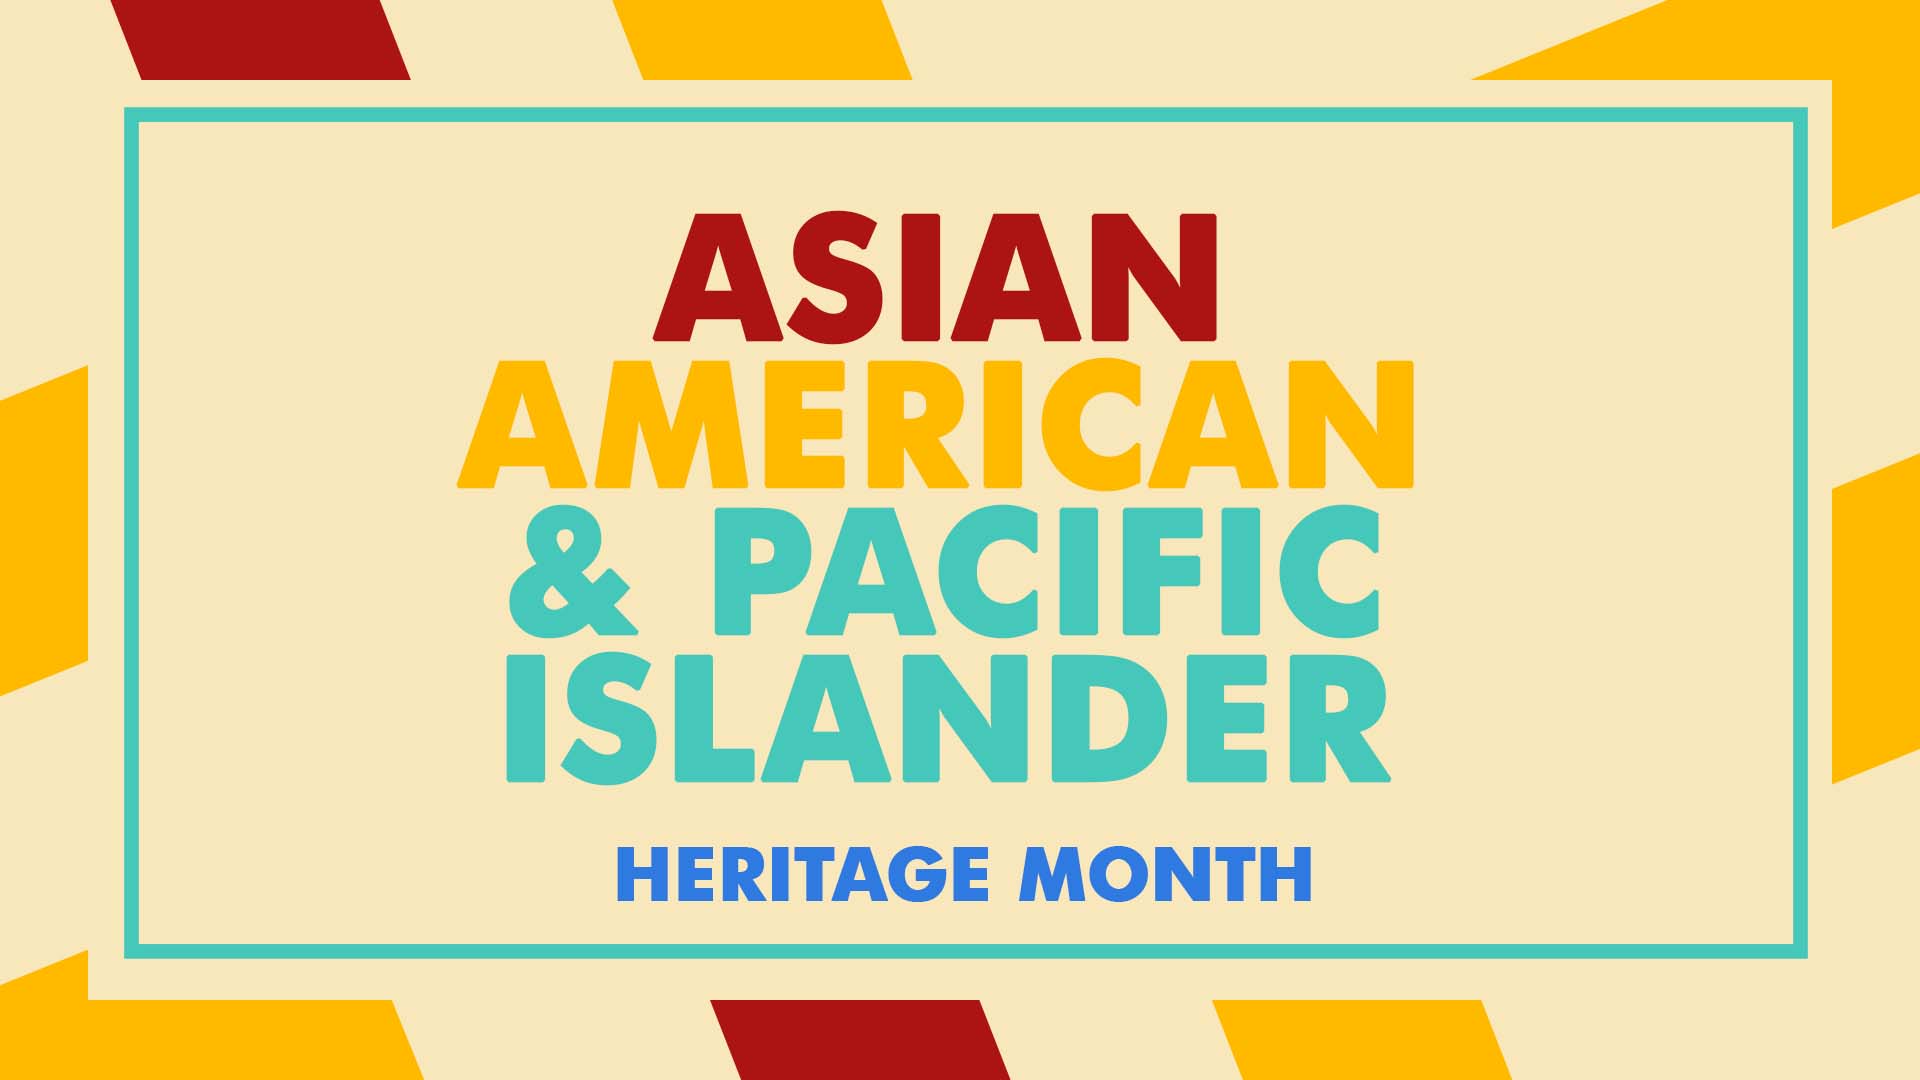 Yellow graphic with red and blue lettering spelling out Asian American & Pacific Islander Heritage Month